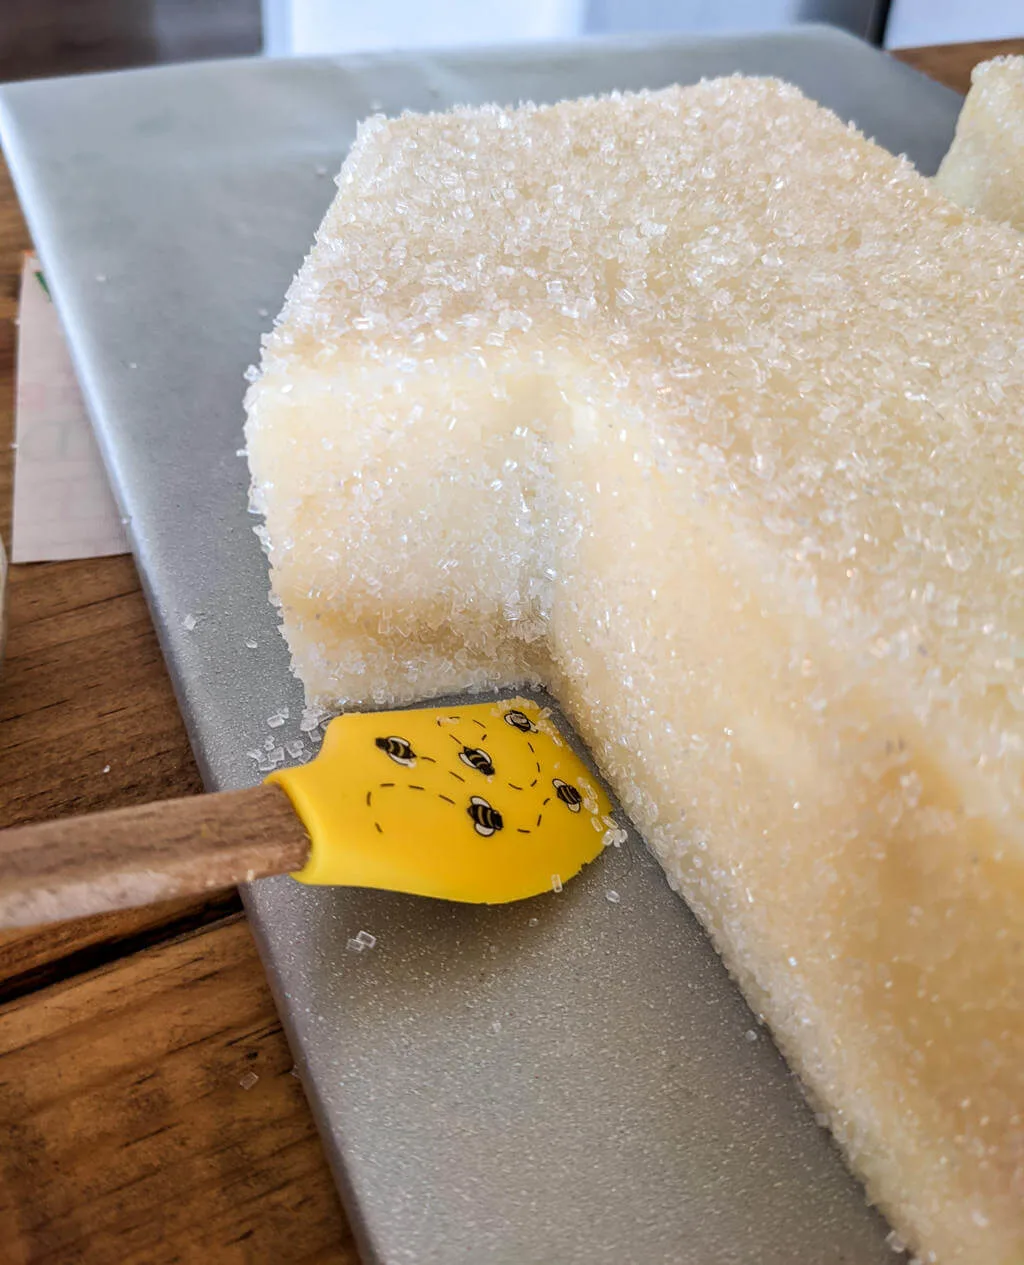 Using a spatula to clean sanding sugar from cake board